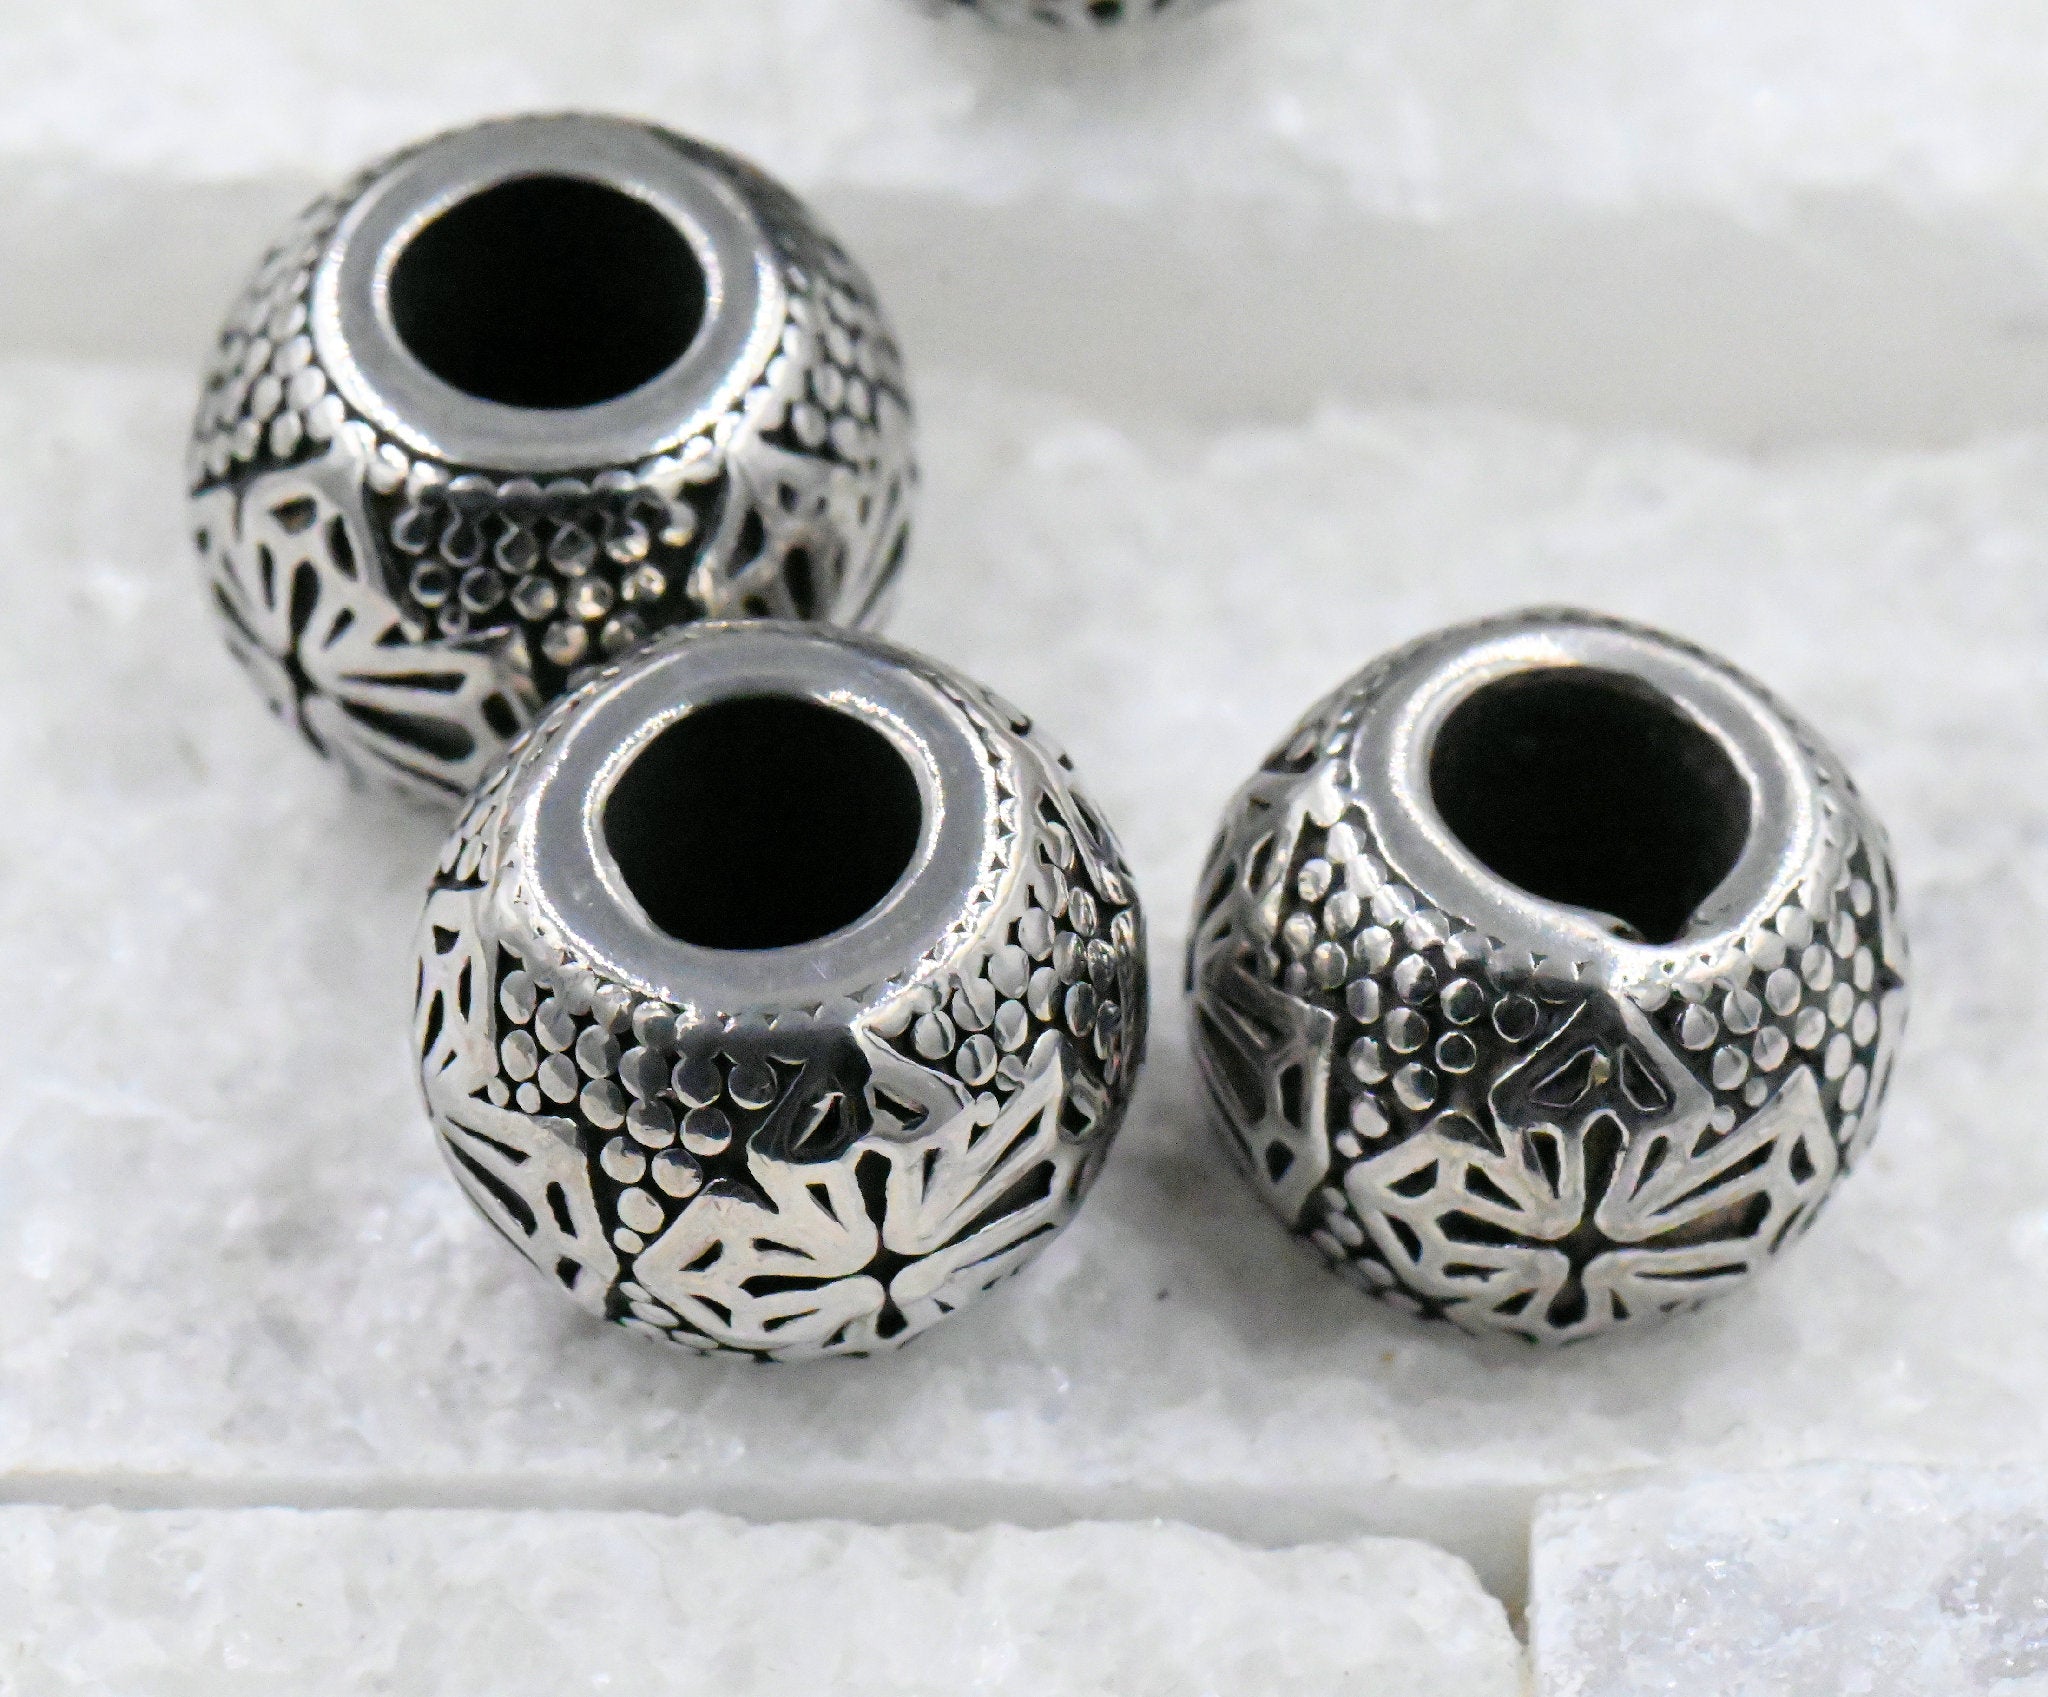 Chunky Stainless Steel Large Hole Beads. 2pc